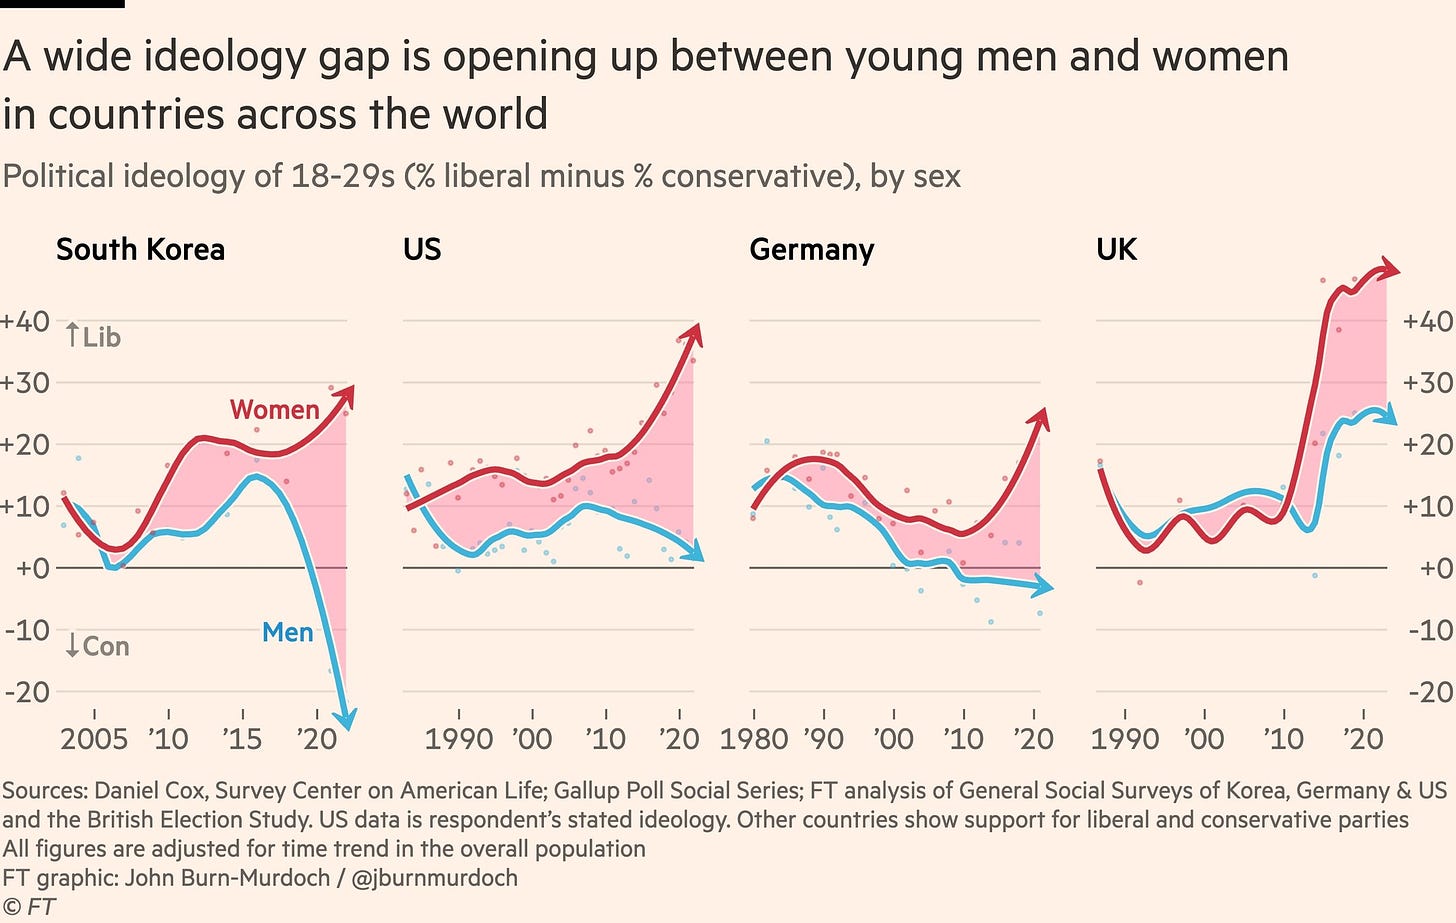 Four charts showing a wide ideology gap between young men and women in South Korea, US, Germany and the UK